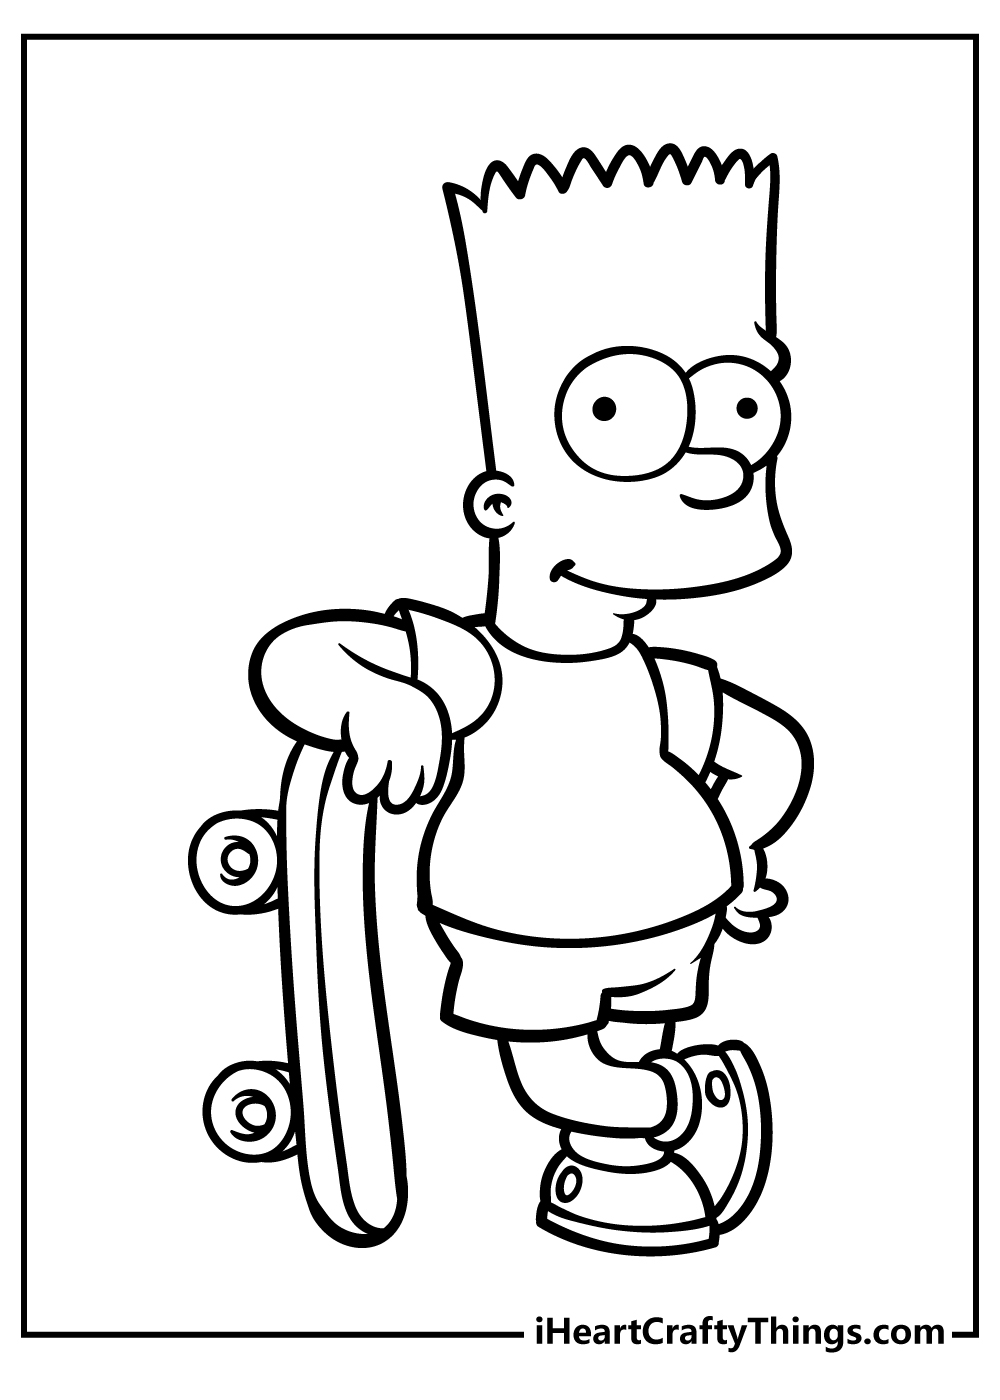 Simpsons Coloring Sheet for children free download